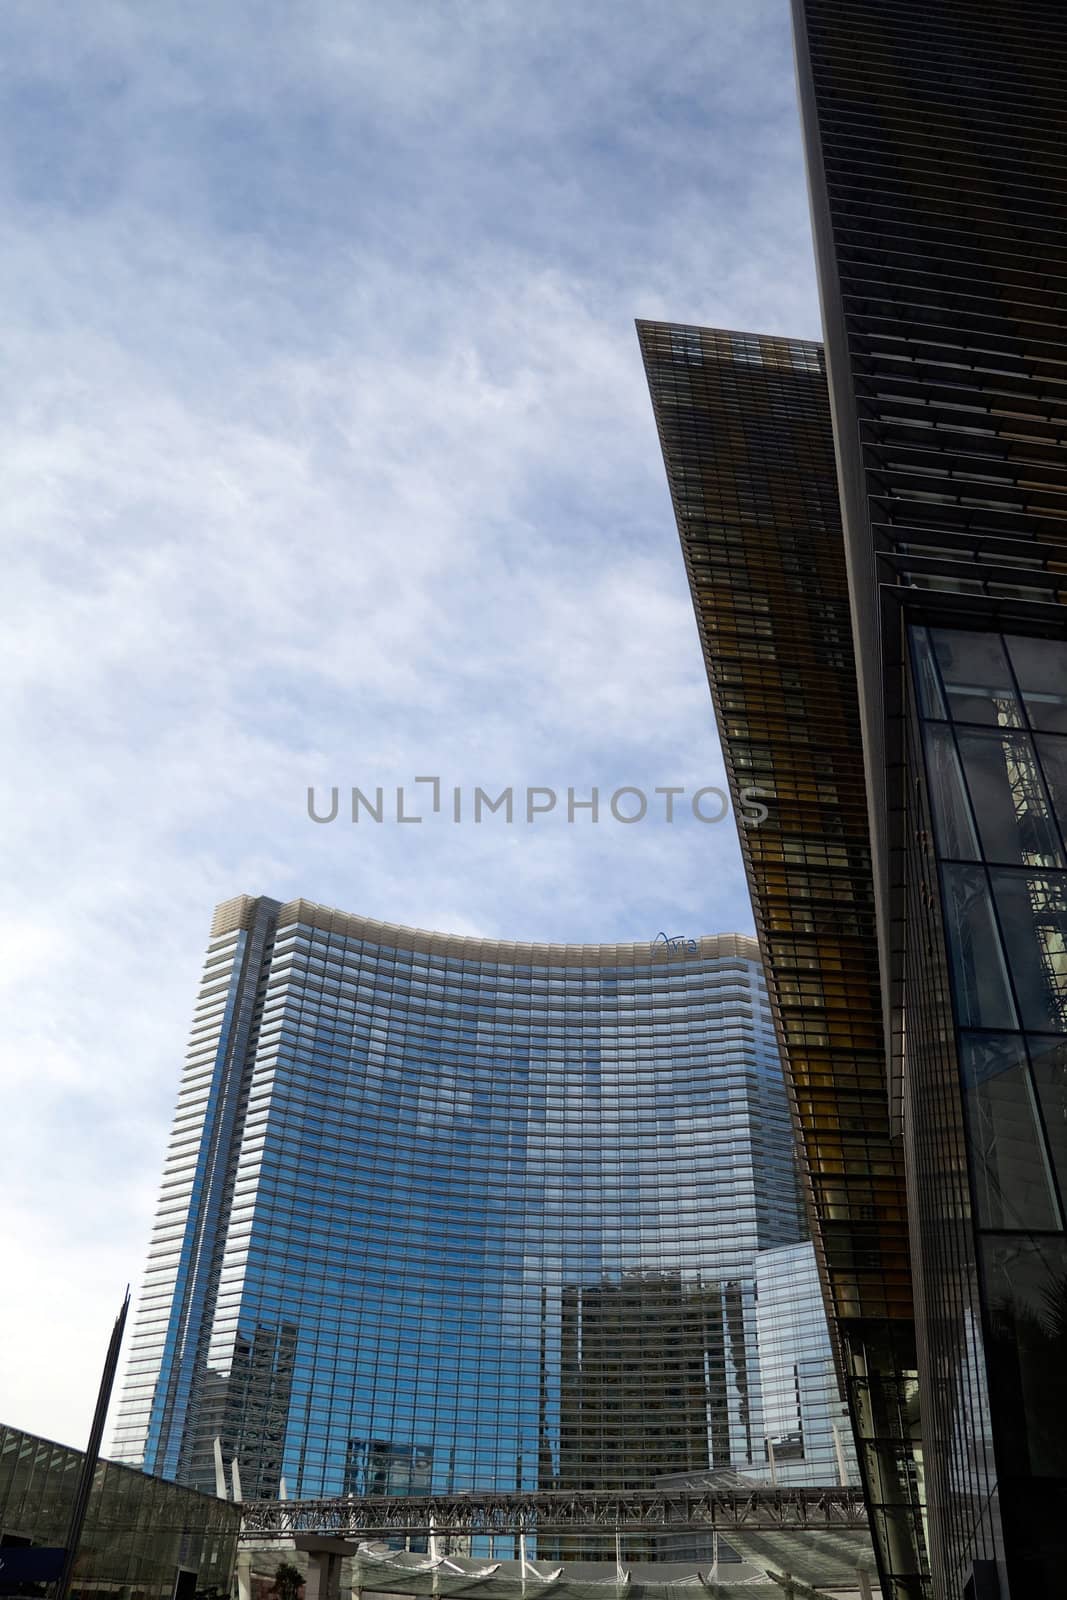 December 30th, 2009 - Las Vegas, Nevada, USA - The large CityCenter Complex feature the VEER towers to the right and the Aria Hotel and Casino in the back